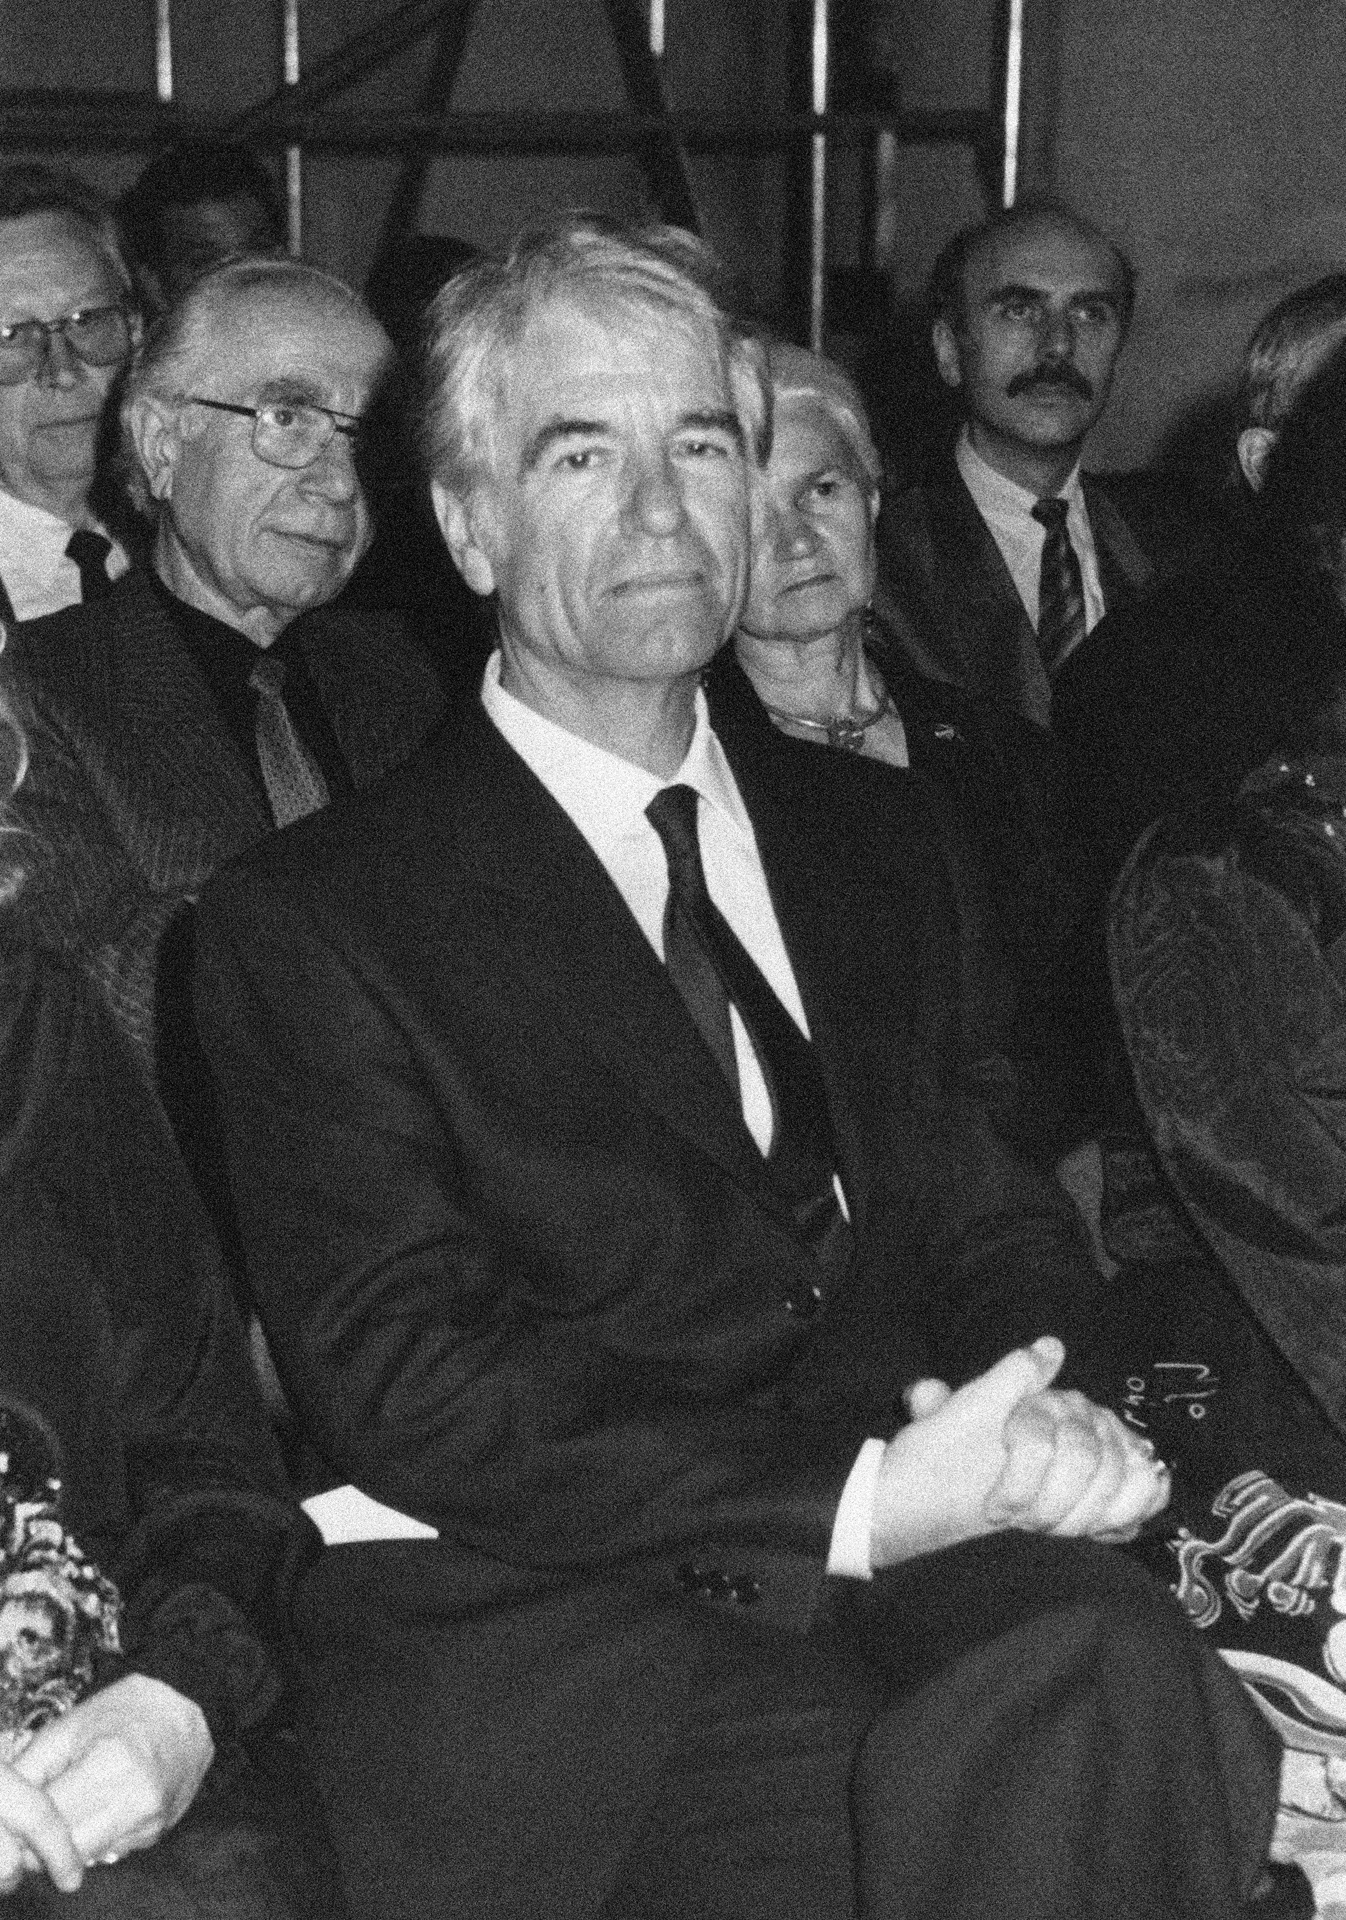 Black and white portrait photo. A man in his 70s is sitting on a chair in the audience, with other people sitting behind him. The man is wearing a black suit, a tie and has his hands folded in his lap. His face is long, his thick hair is white, his eyebrows are prominent. He has no beard.